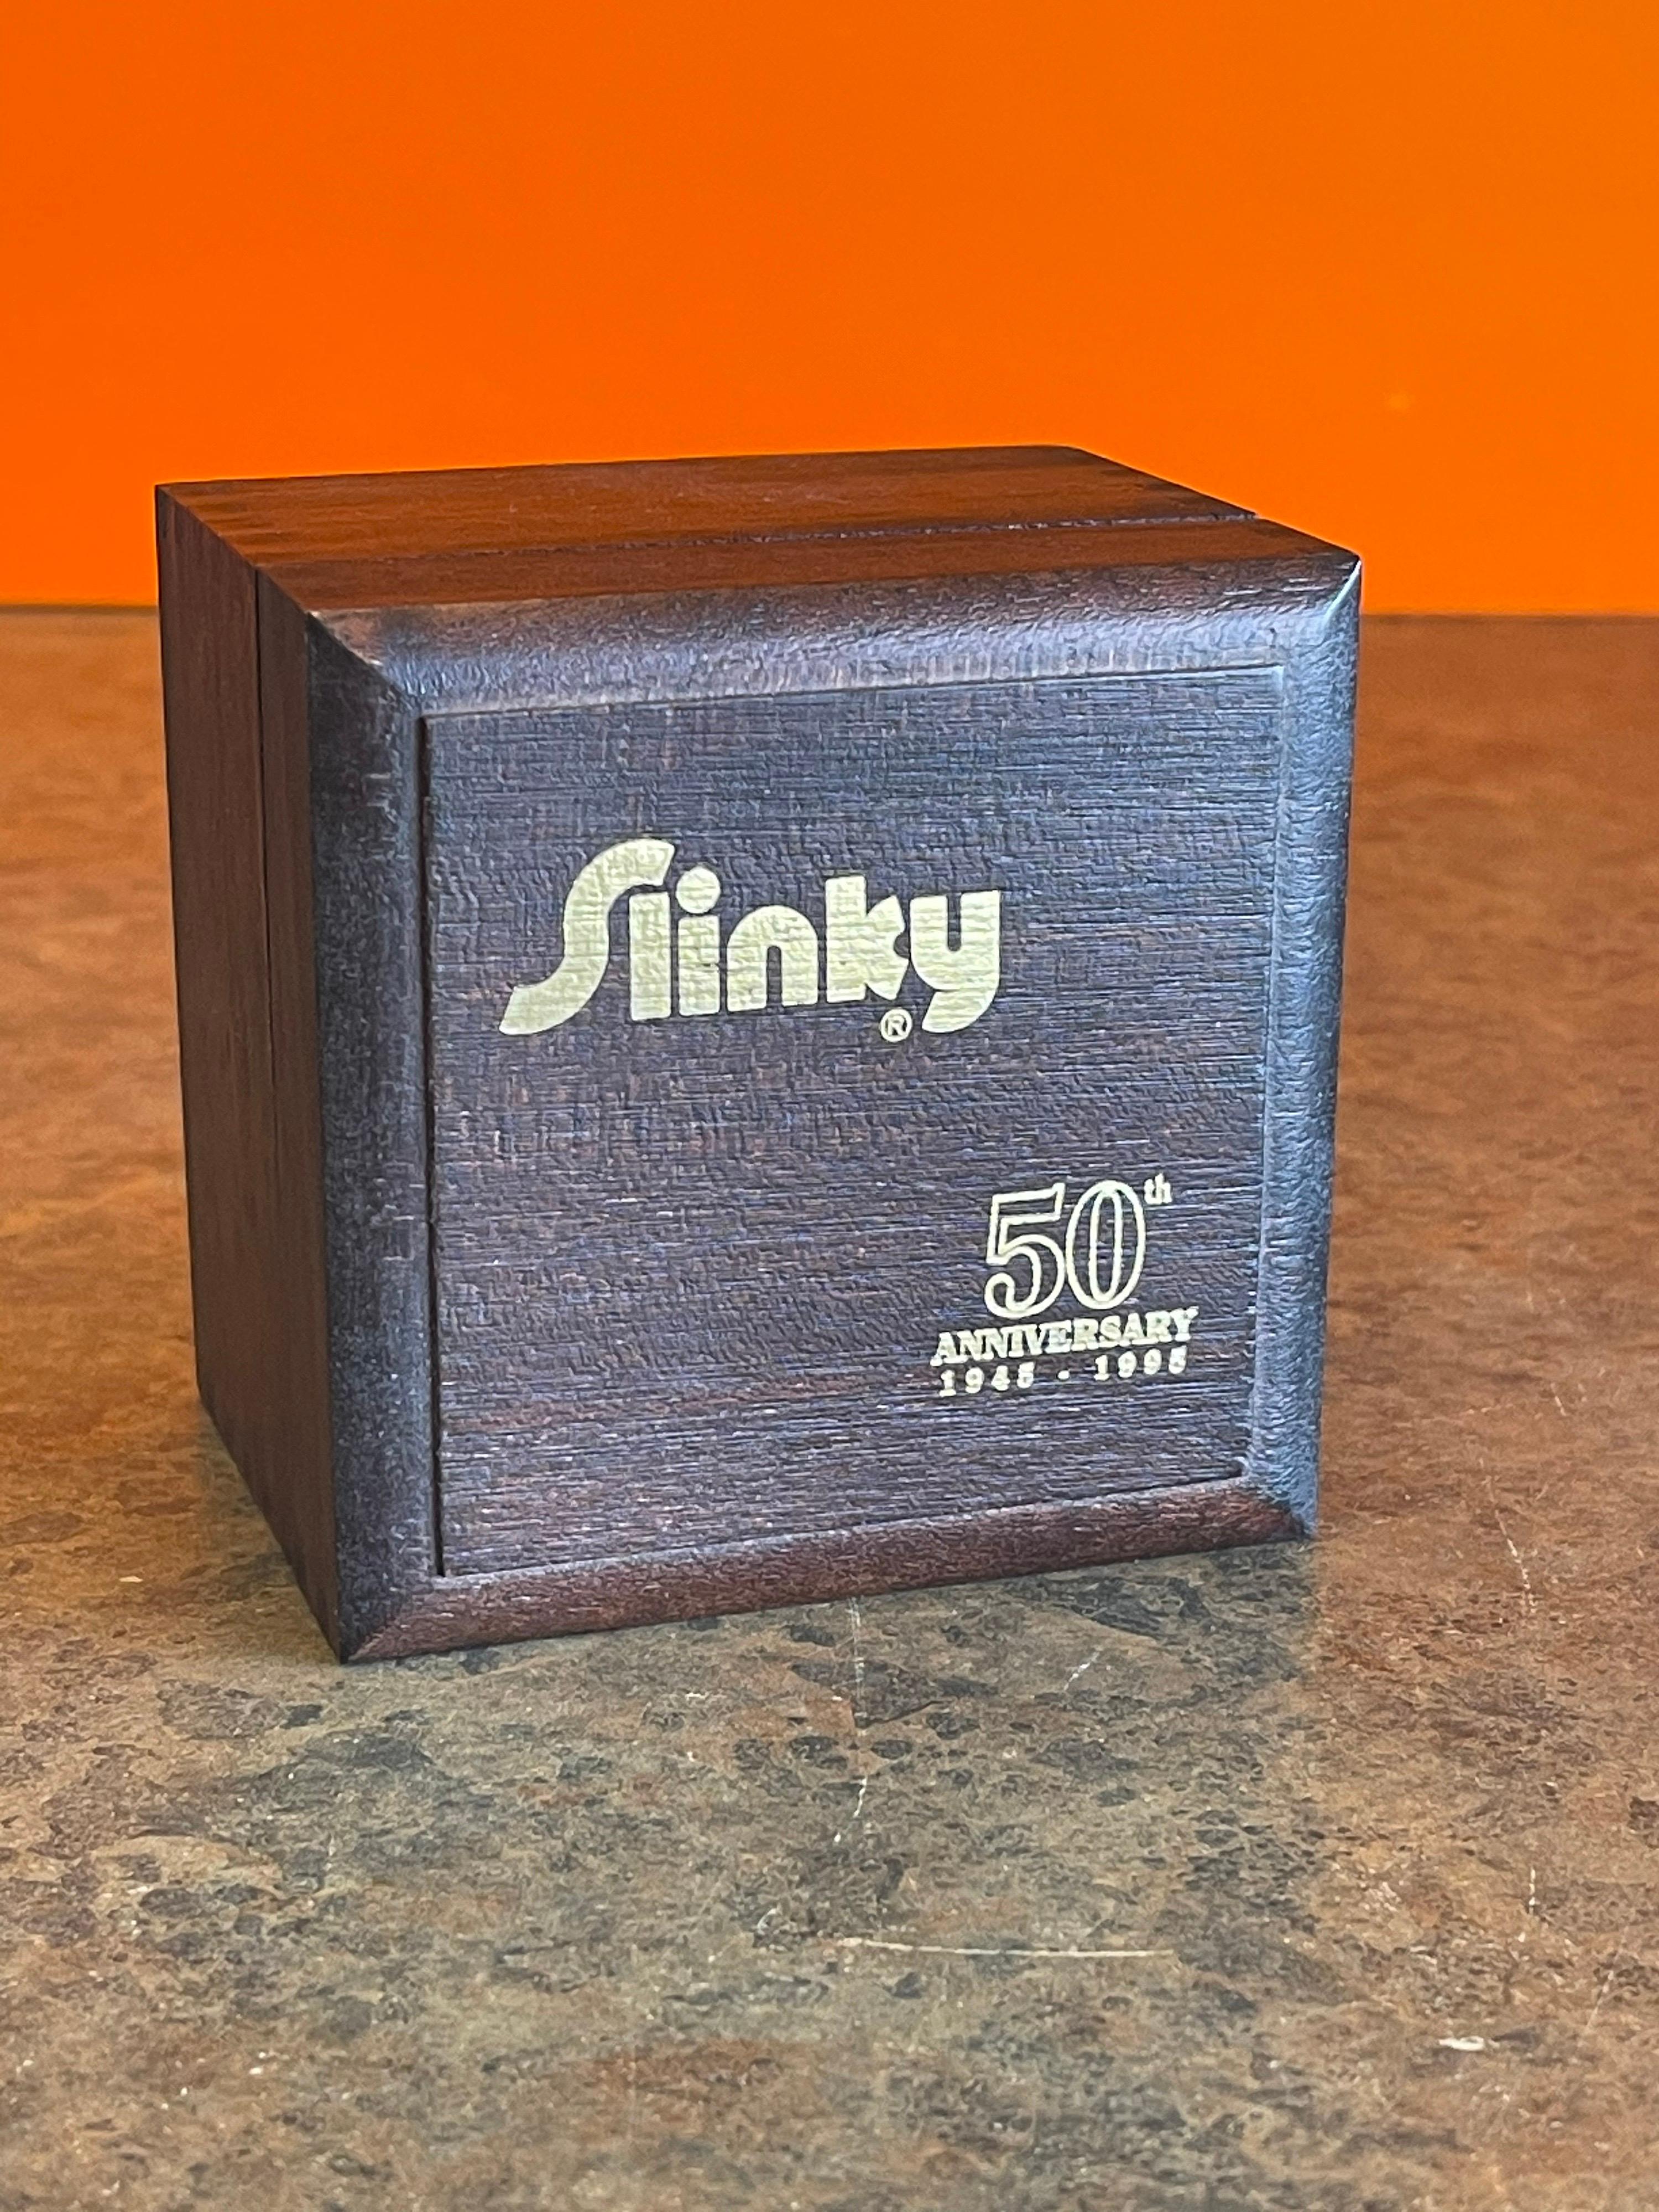 20th Century 50th Anniversary Gold-Plated Slinky Toy in Wood Box, New Condition